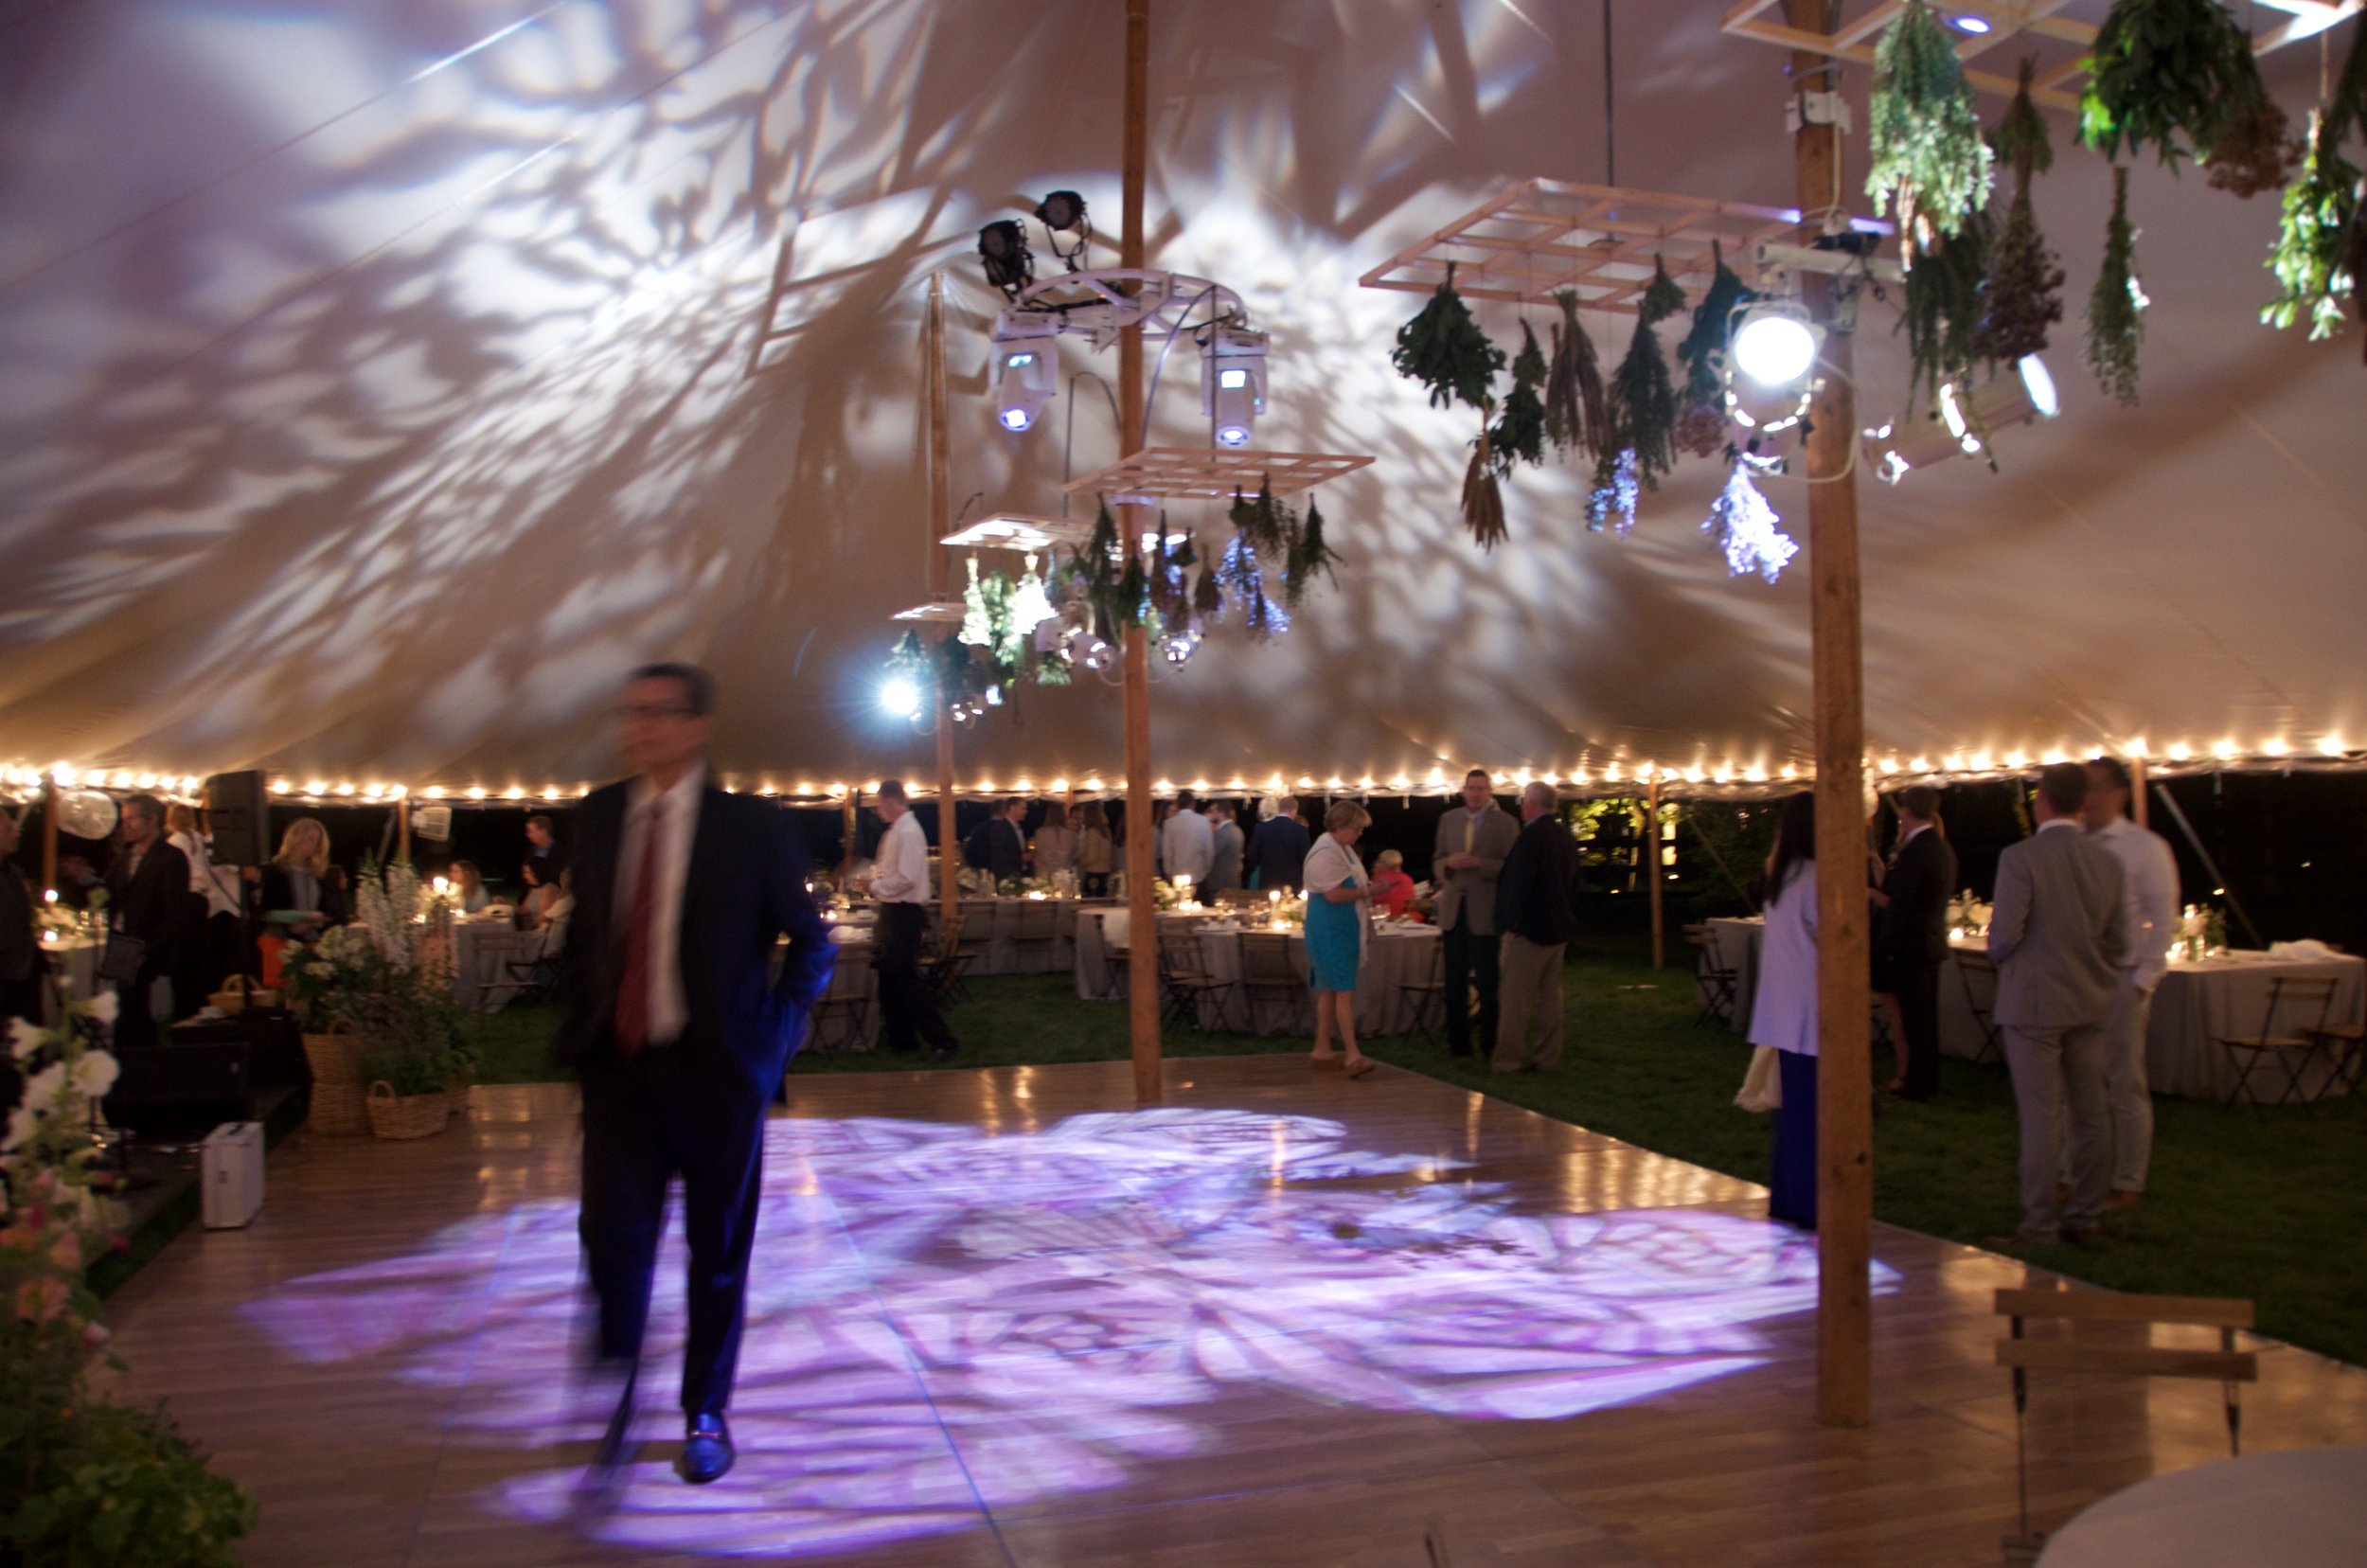 Patterned gobos and dance floor lighting for a tented wedding